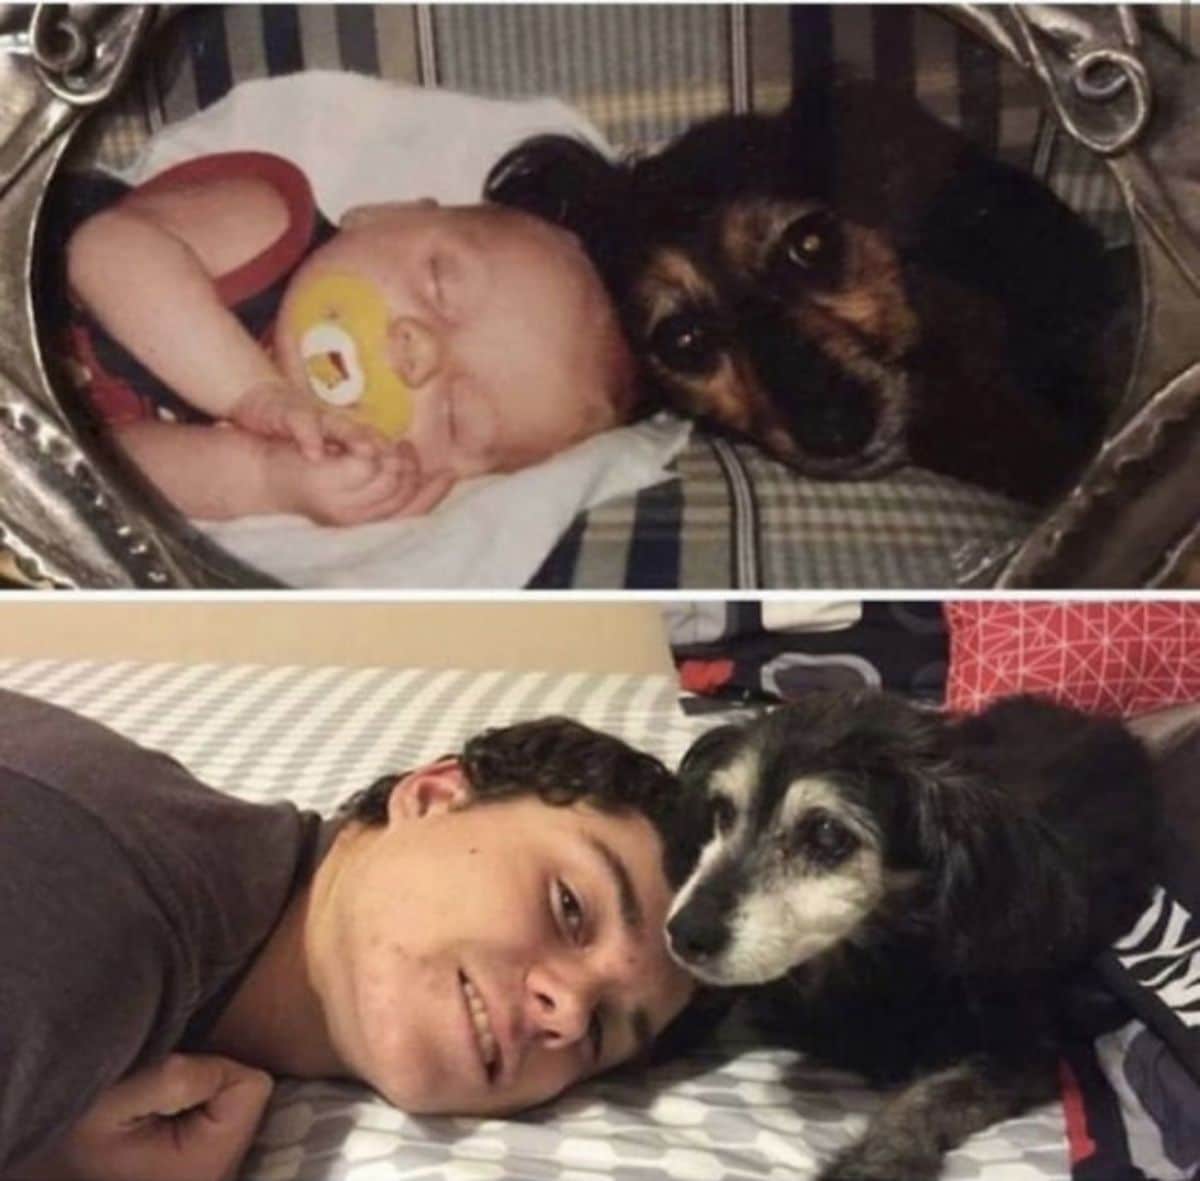 1 photo of a baby with a black and brown dog and 1 photo of them grown up together in the same pose on a bed